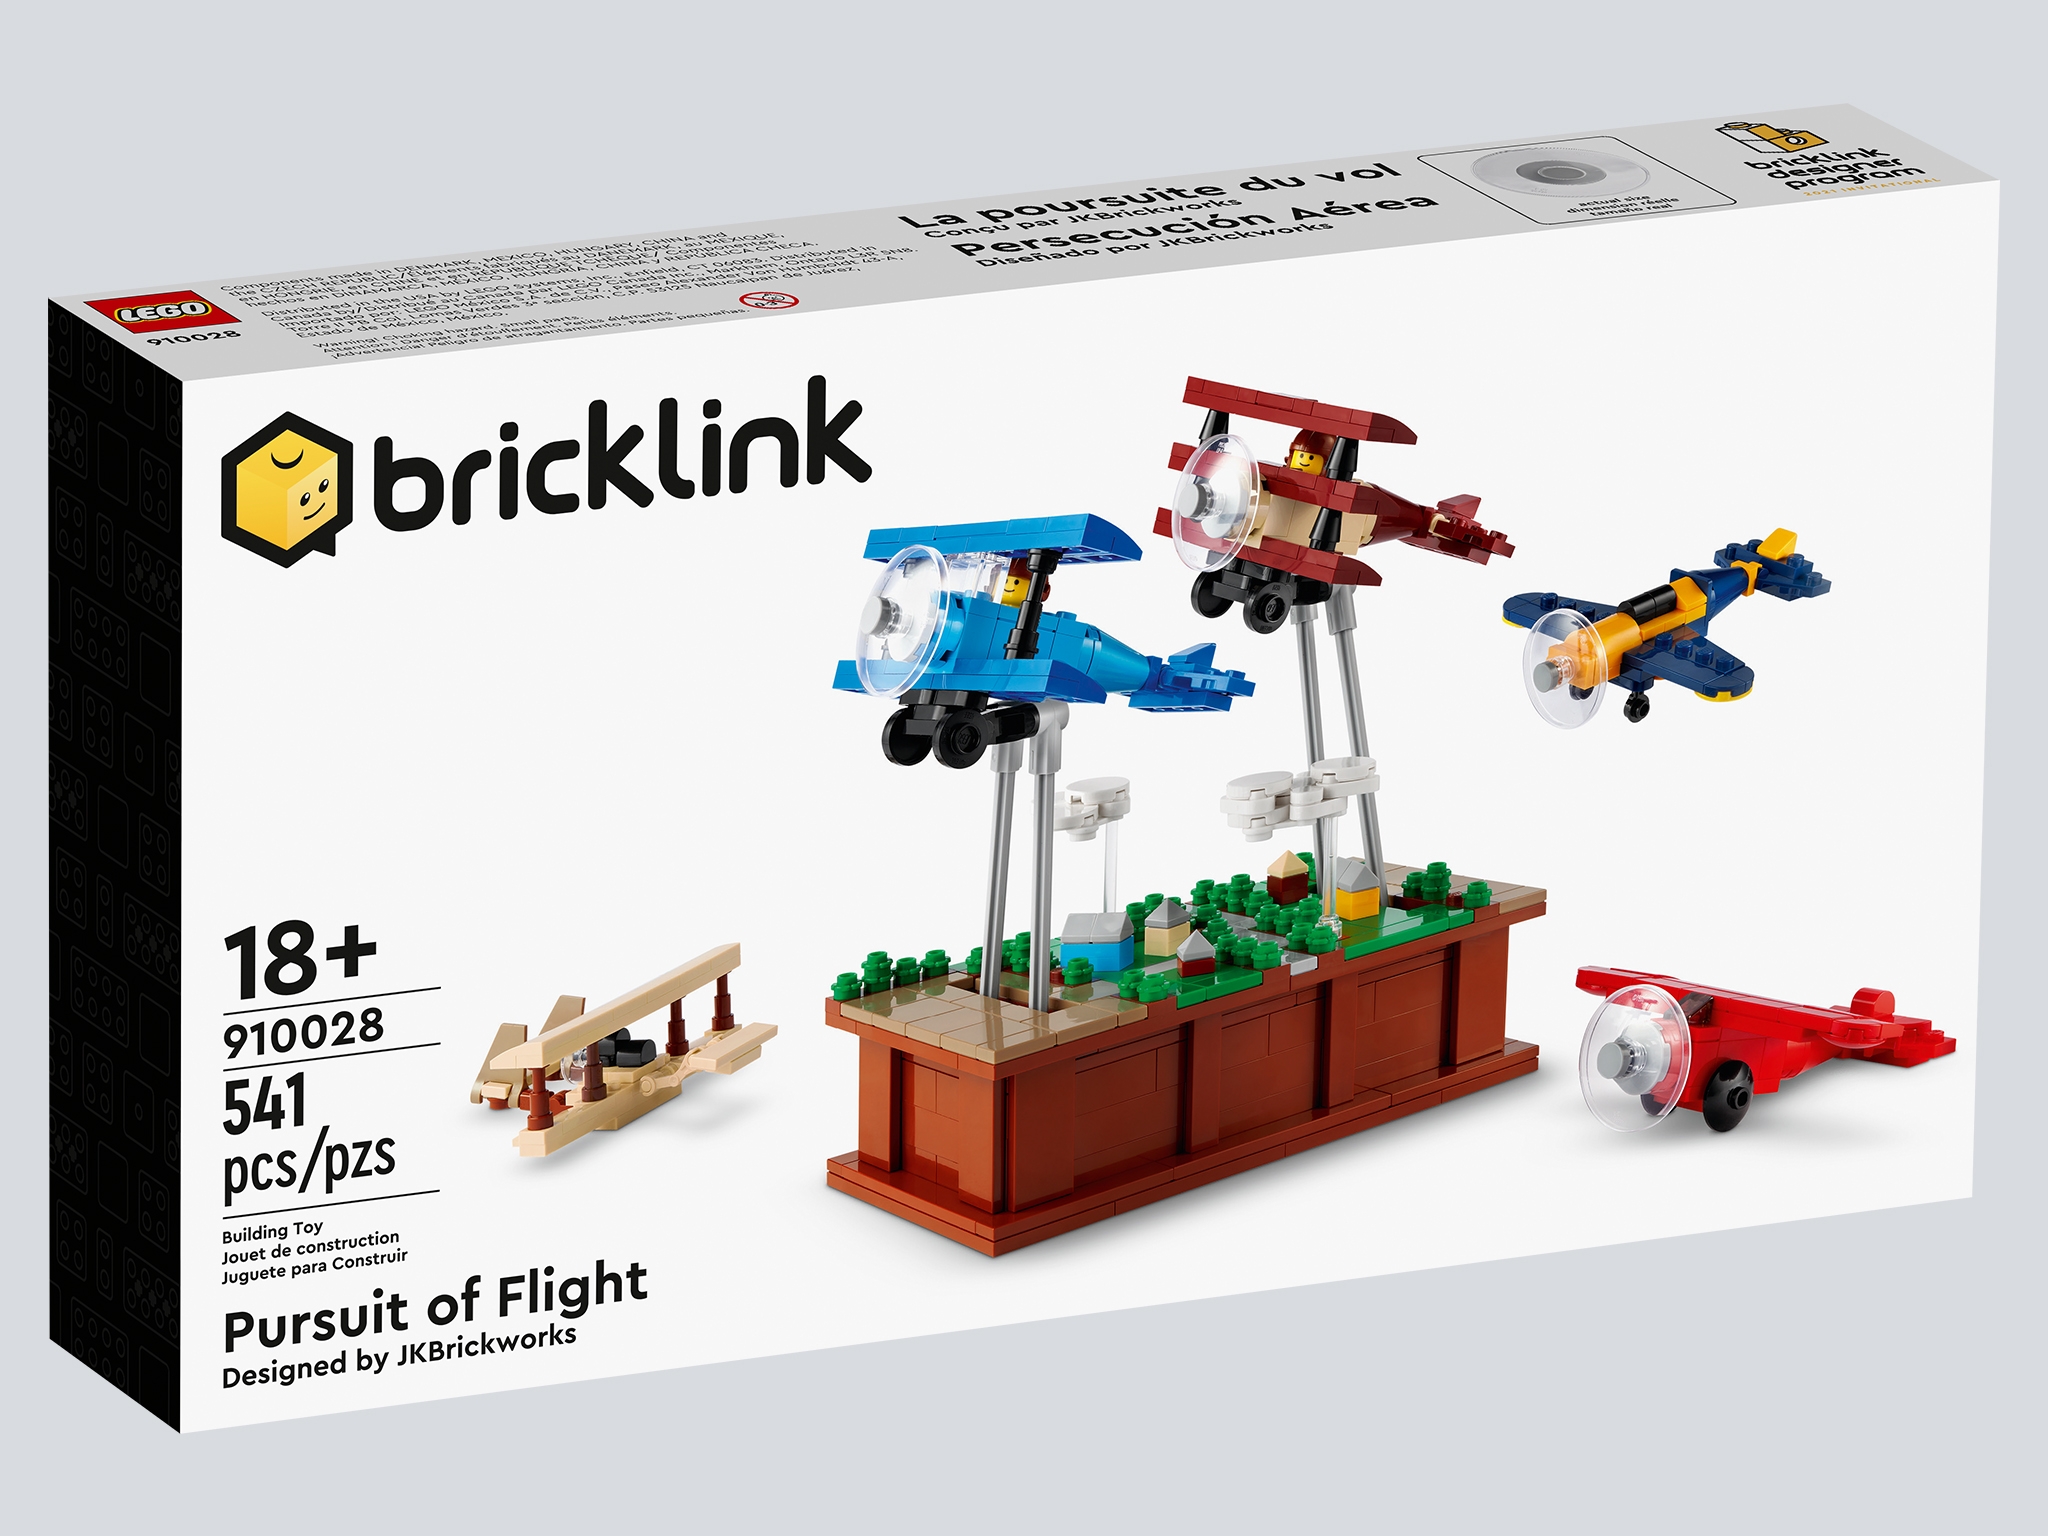 ▻ Bricklink Designer Program: instructions for sets from the 3rd phase are  available - HOTH BRICKS